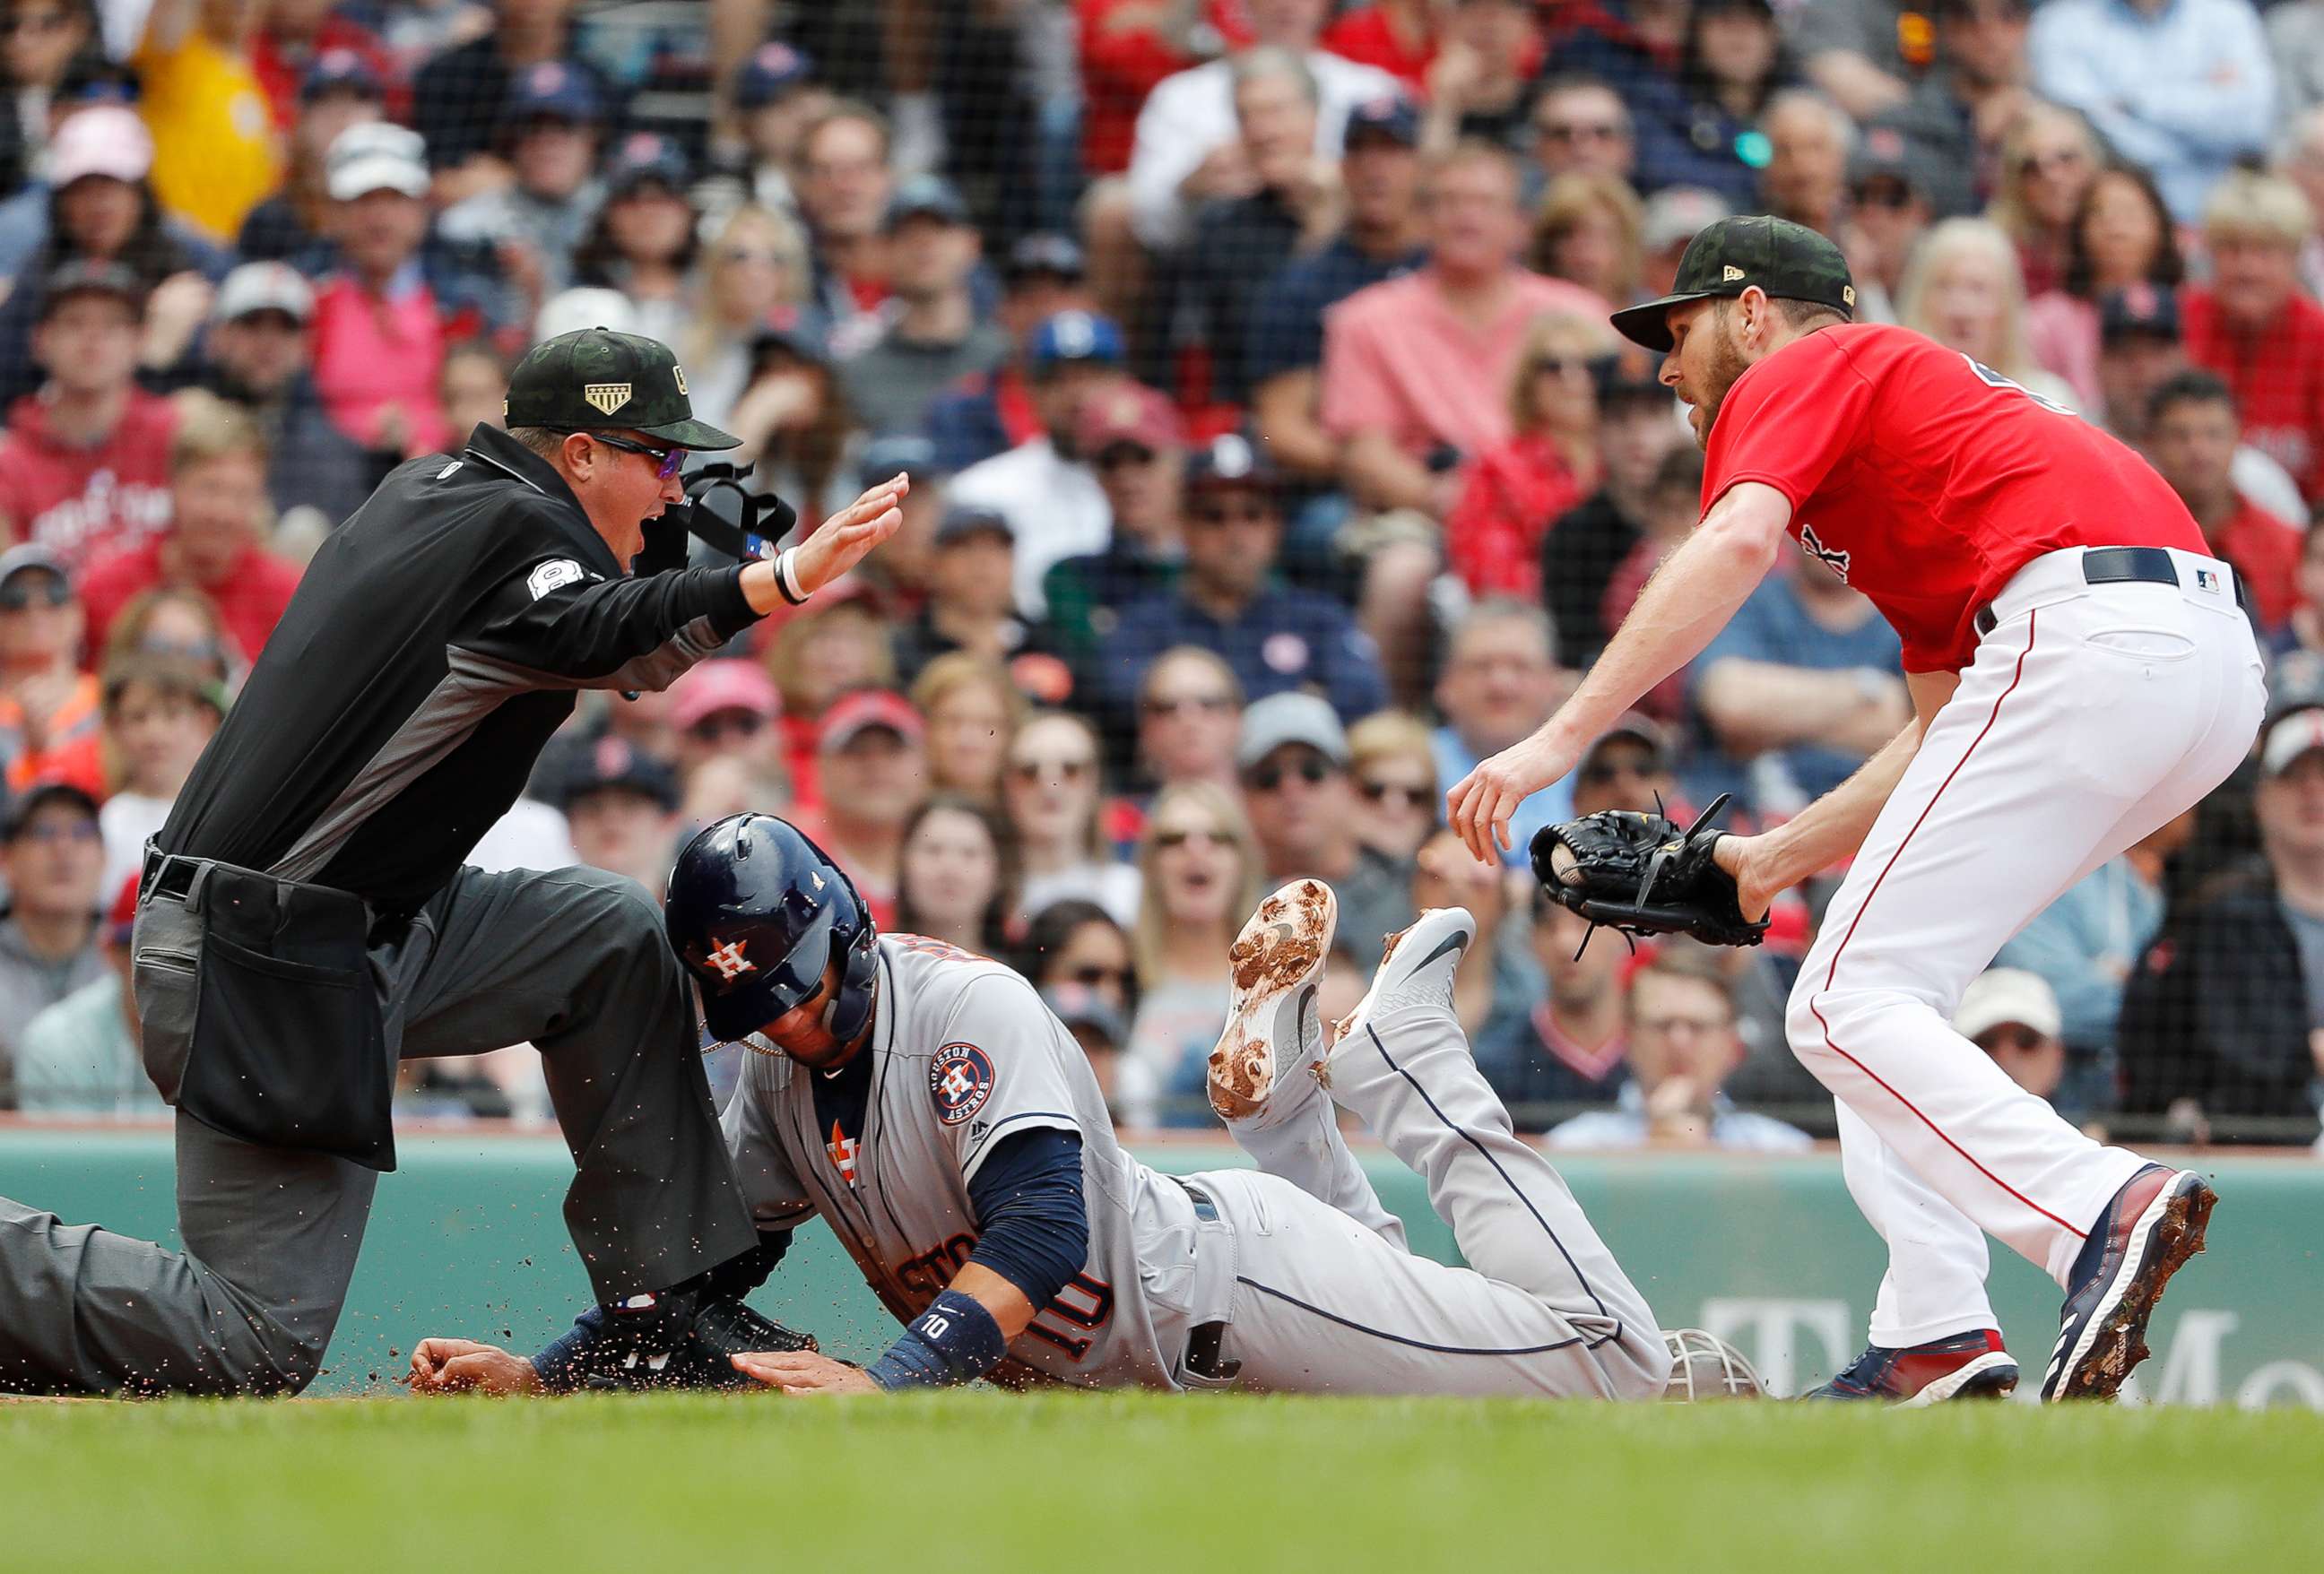 PHOTO: Houston Astros' Yuli Gurriel, center, is called safe by umpire Cory Blaser, left, after scoring on a wild pitch by starting pitcher Chris Sale, right, during the second inning of a baseball game, May 19, 2019, at Fenway Park in Boston.